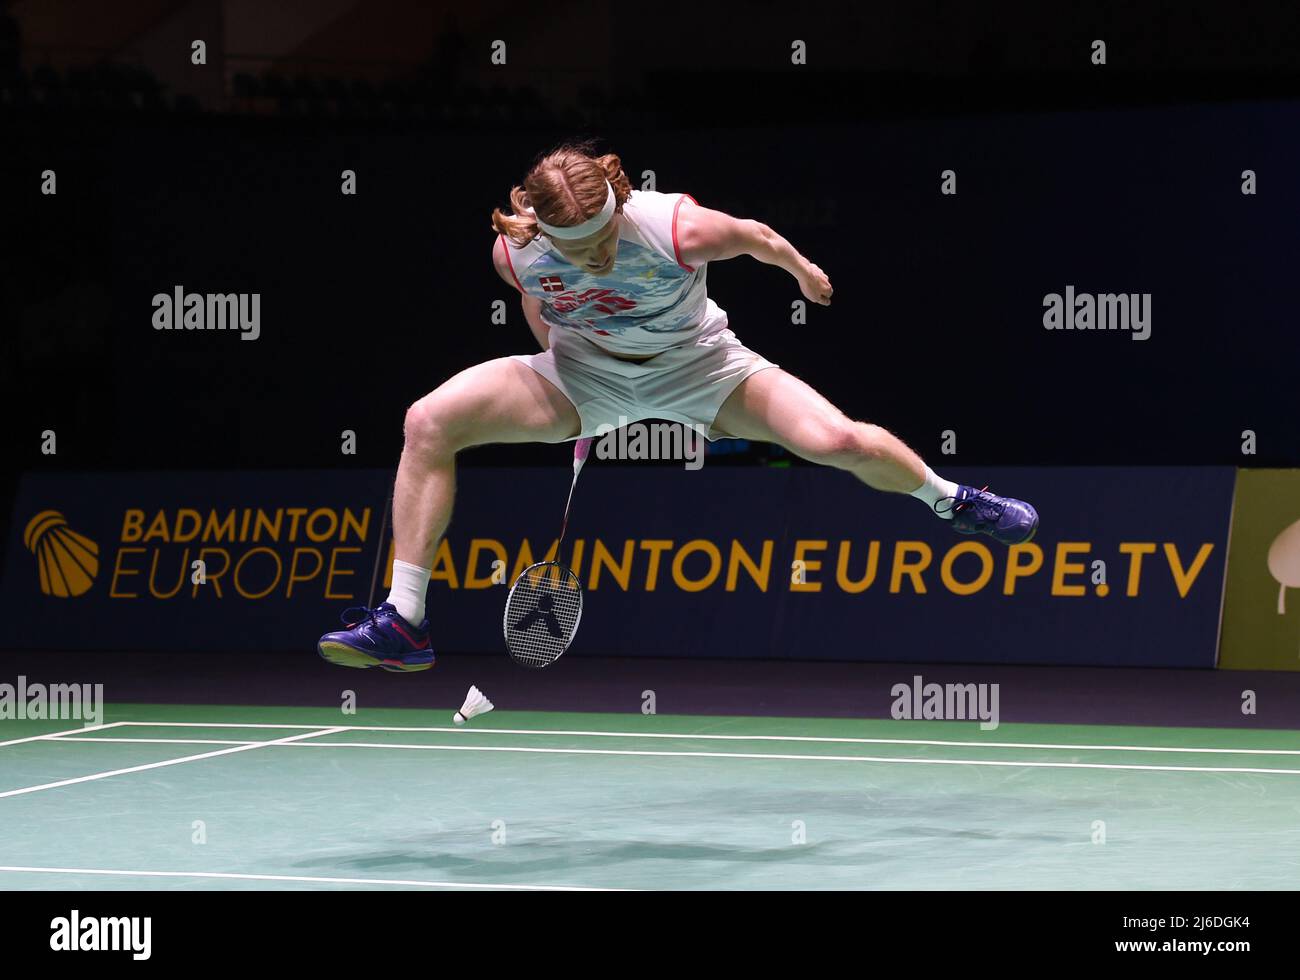 220501) -- MADRID, May 1, 2022 (Xinhua) -- Anders Antonsen of Denmark competes during the mens singles final match against Victor Axelsen of Denmark at Badminton European Championships 2022 in Madrid, Spain,